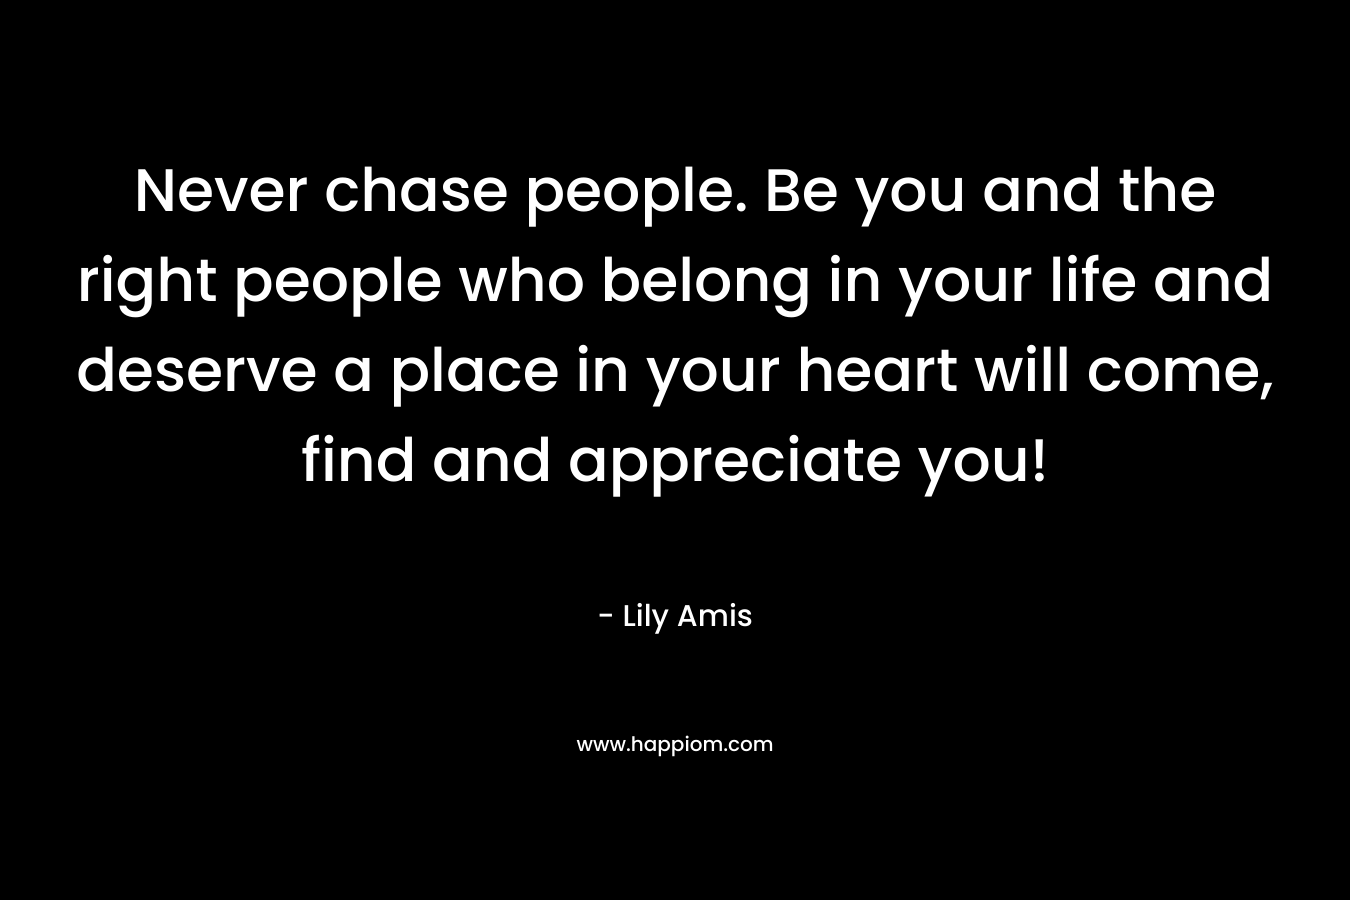 Never chase people. Be you and the right people who belong in your life and deserve a place in your heart will come, find and appreciate you!